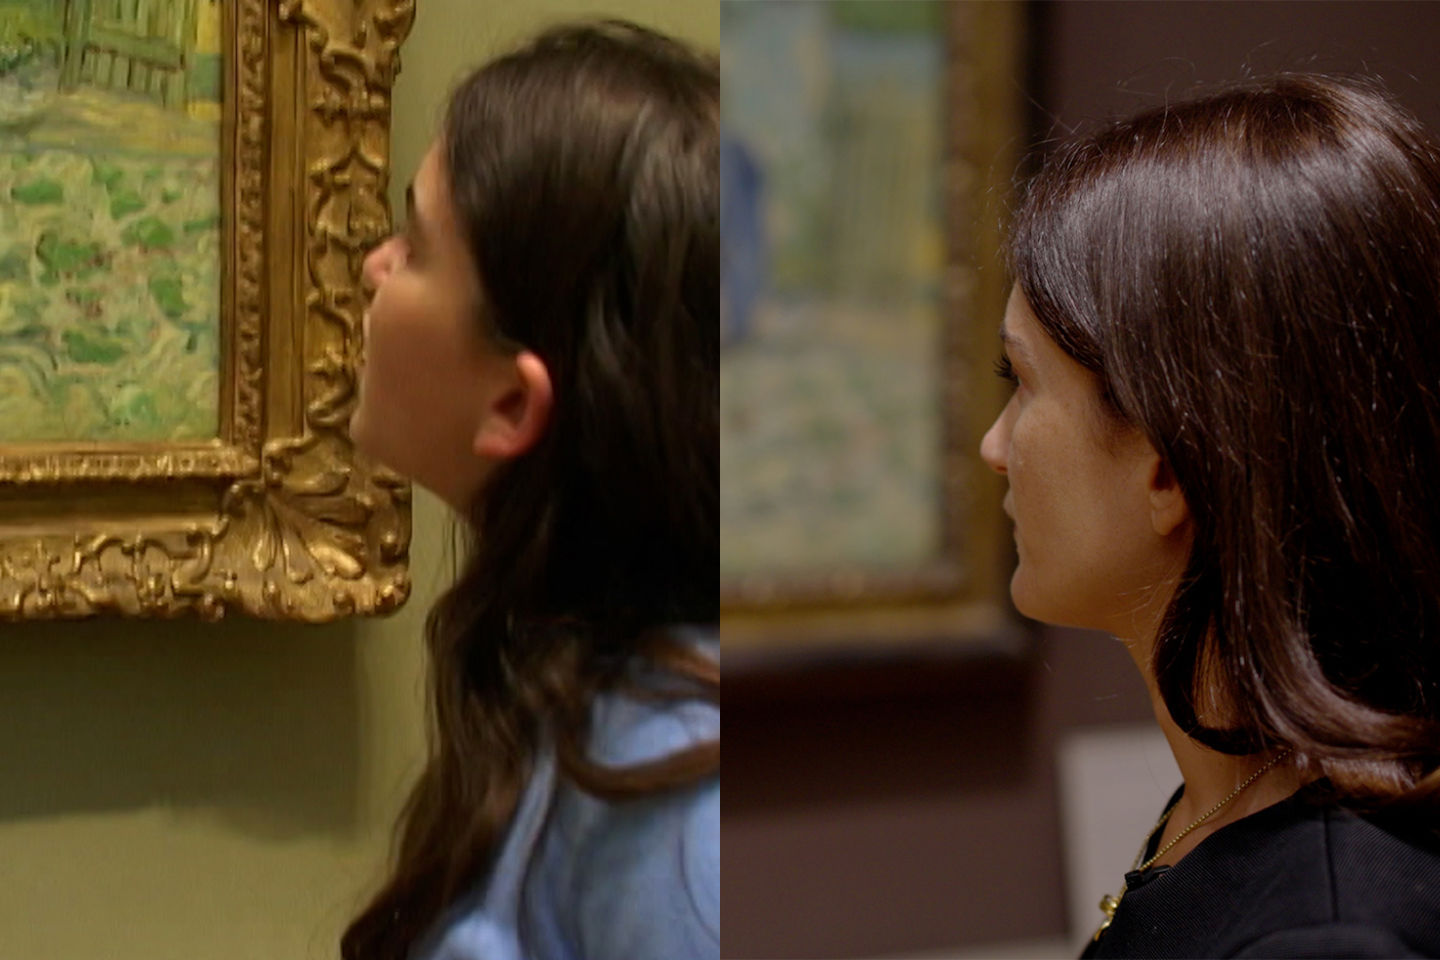 Side-by-side portraits of Emma Sculley looking at a painting as a child and later as an adult.